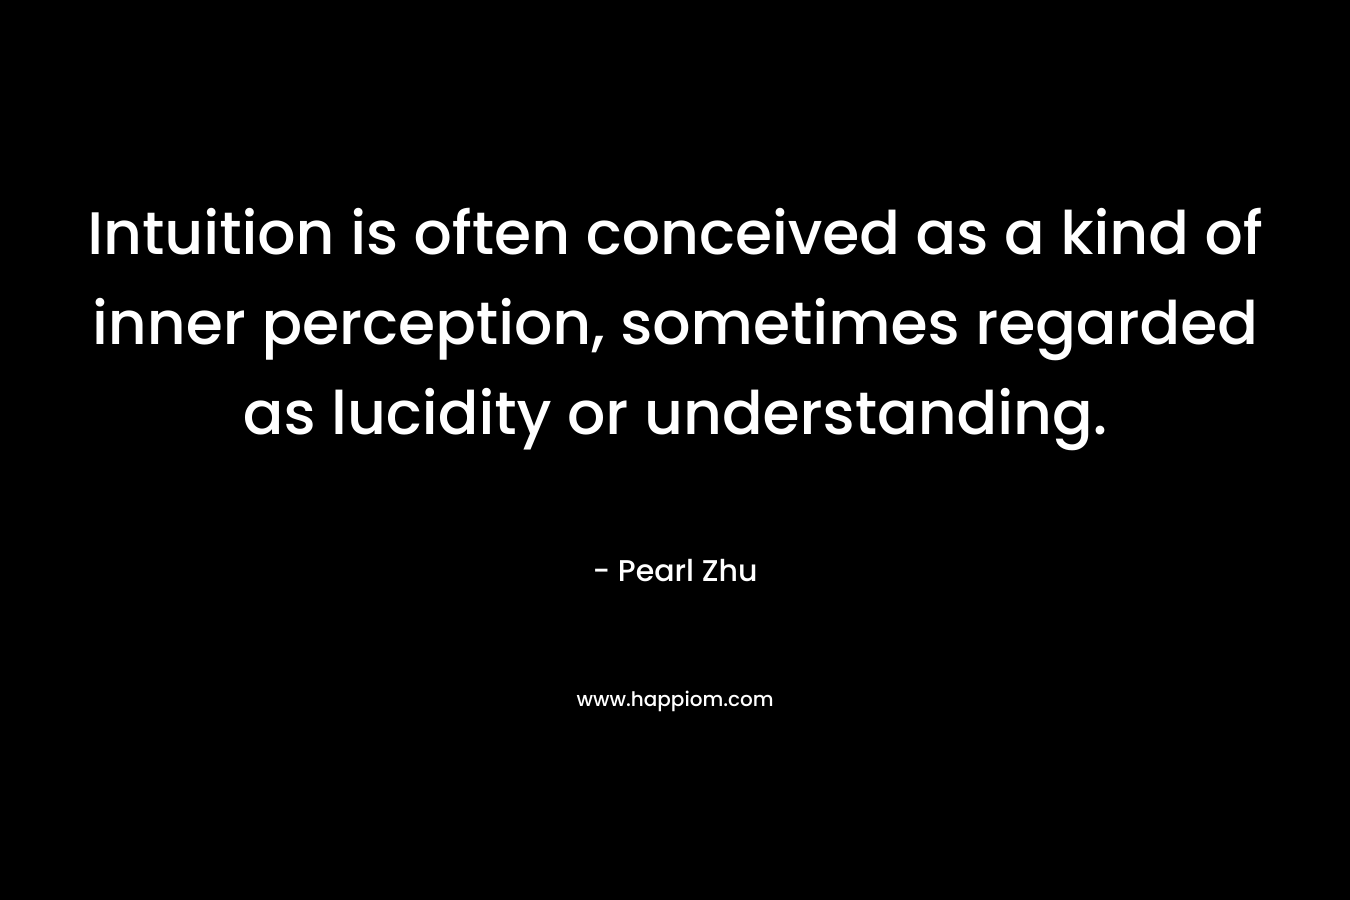 Intuition is often conceived as a kind of inner perception, sometimes regarded as lucidity or understanding. – Pearl Zhu